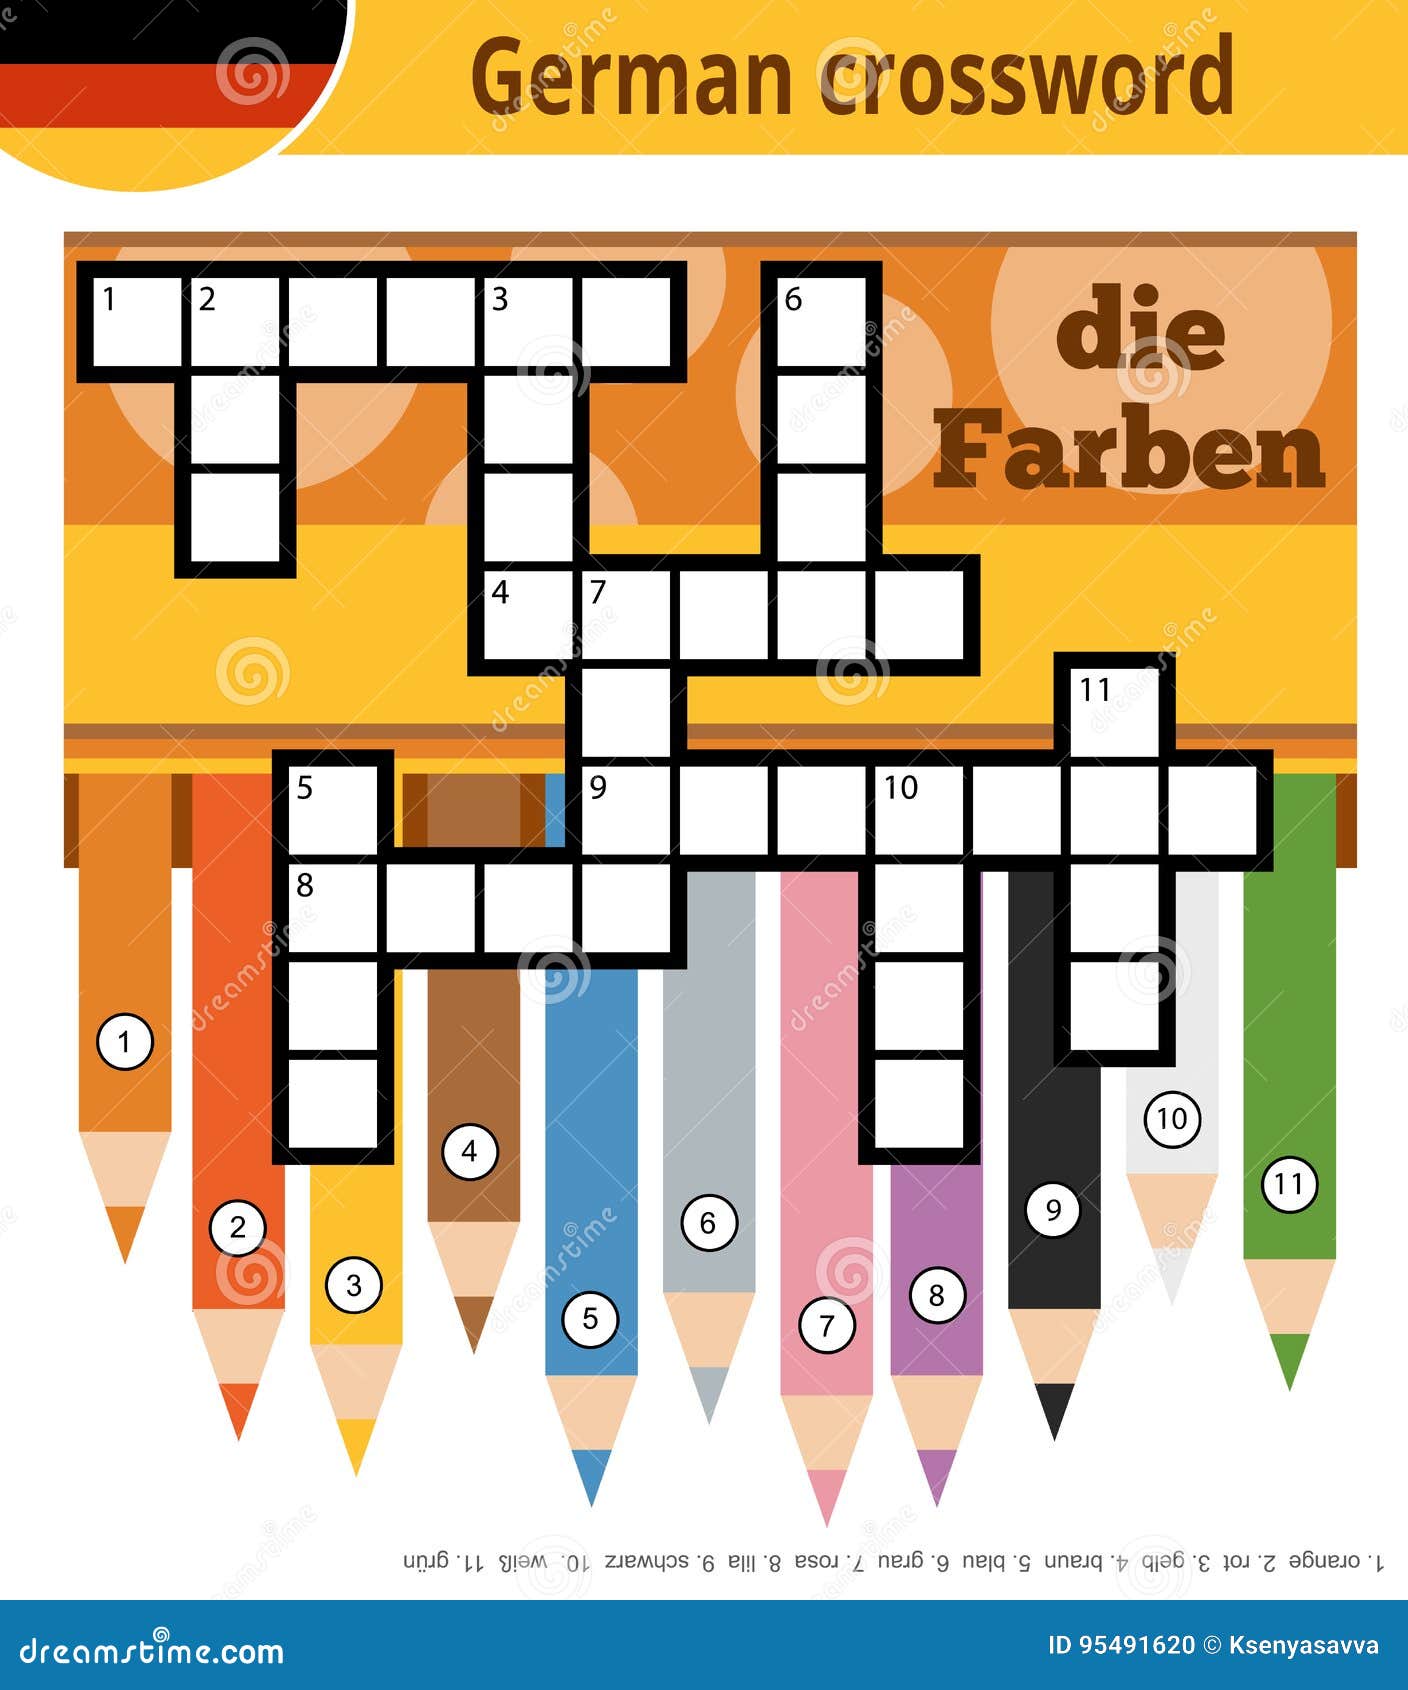 german-crossword-education-game-for-children-about-colors-illustration